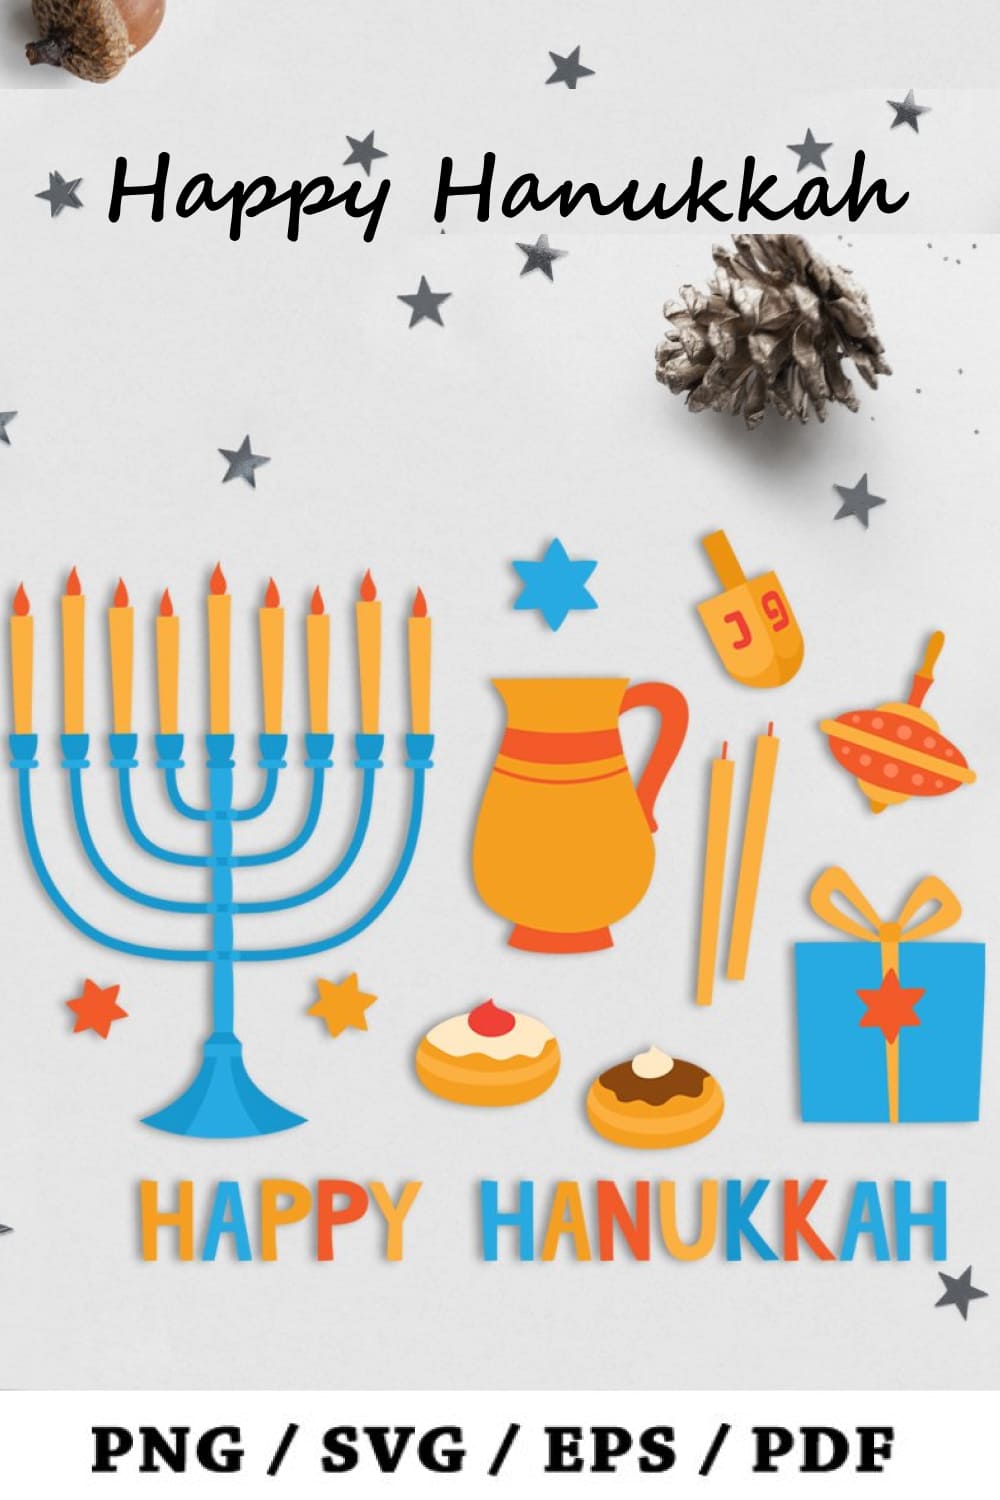 Happy hanukkah. elements and greeting cards of pinterest.